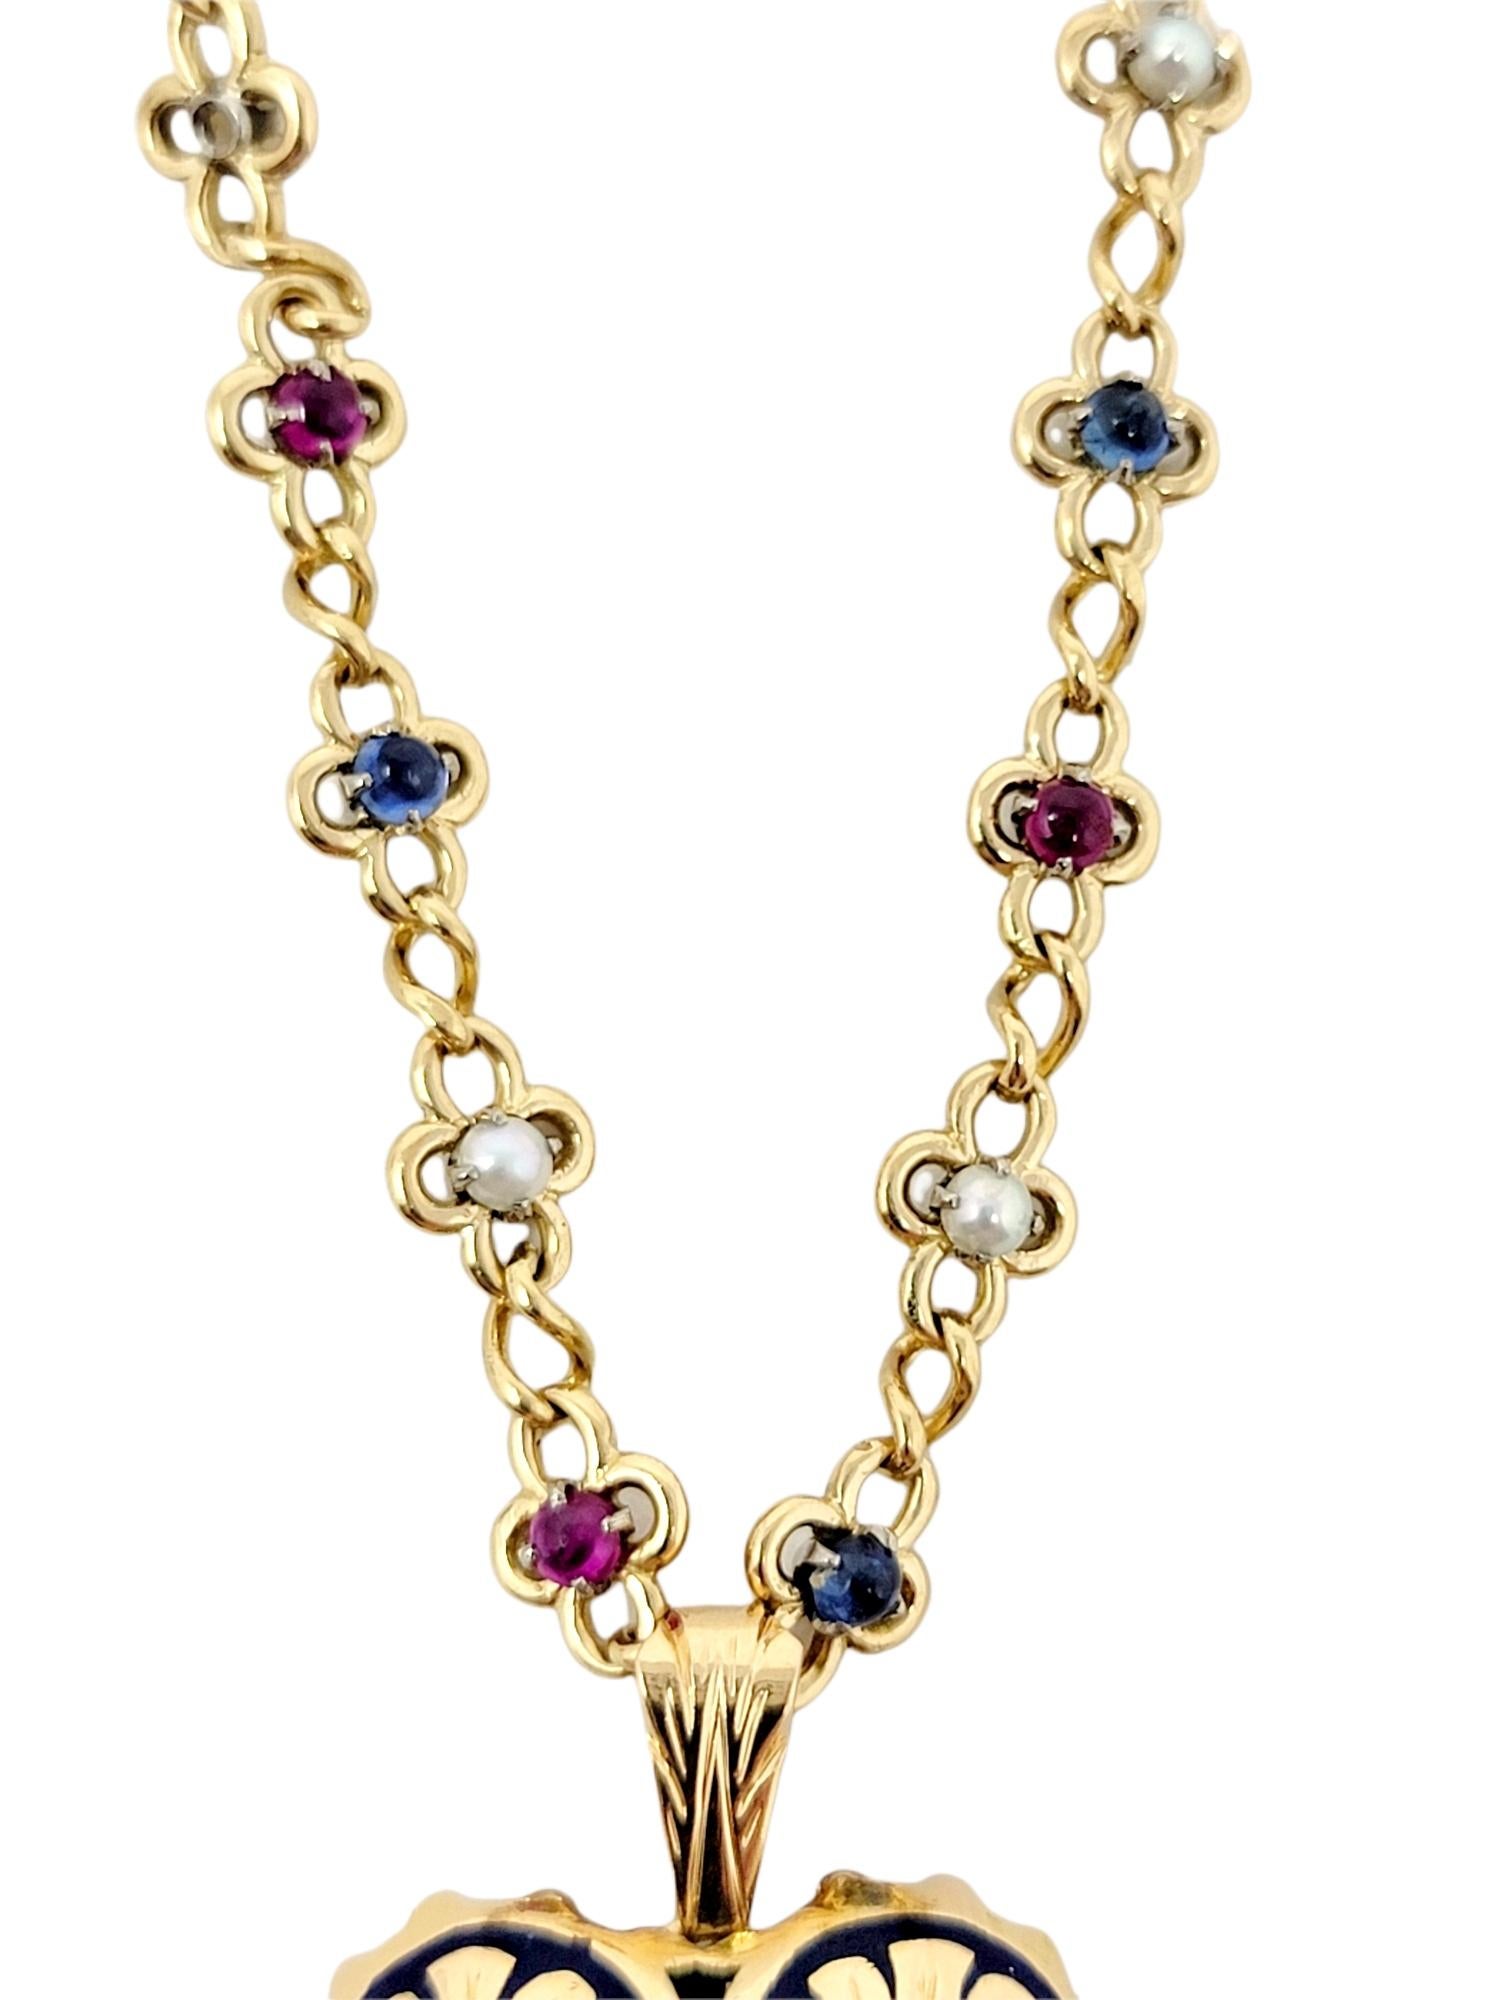 Edwardian Diamond, Ruby, Sapphire and Pearl Pendant / Brooch with Link Chain 18 Karat Gold For Sale